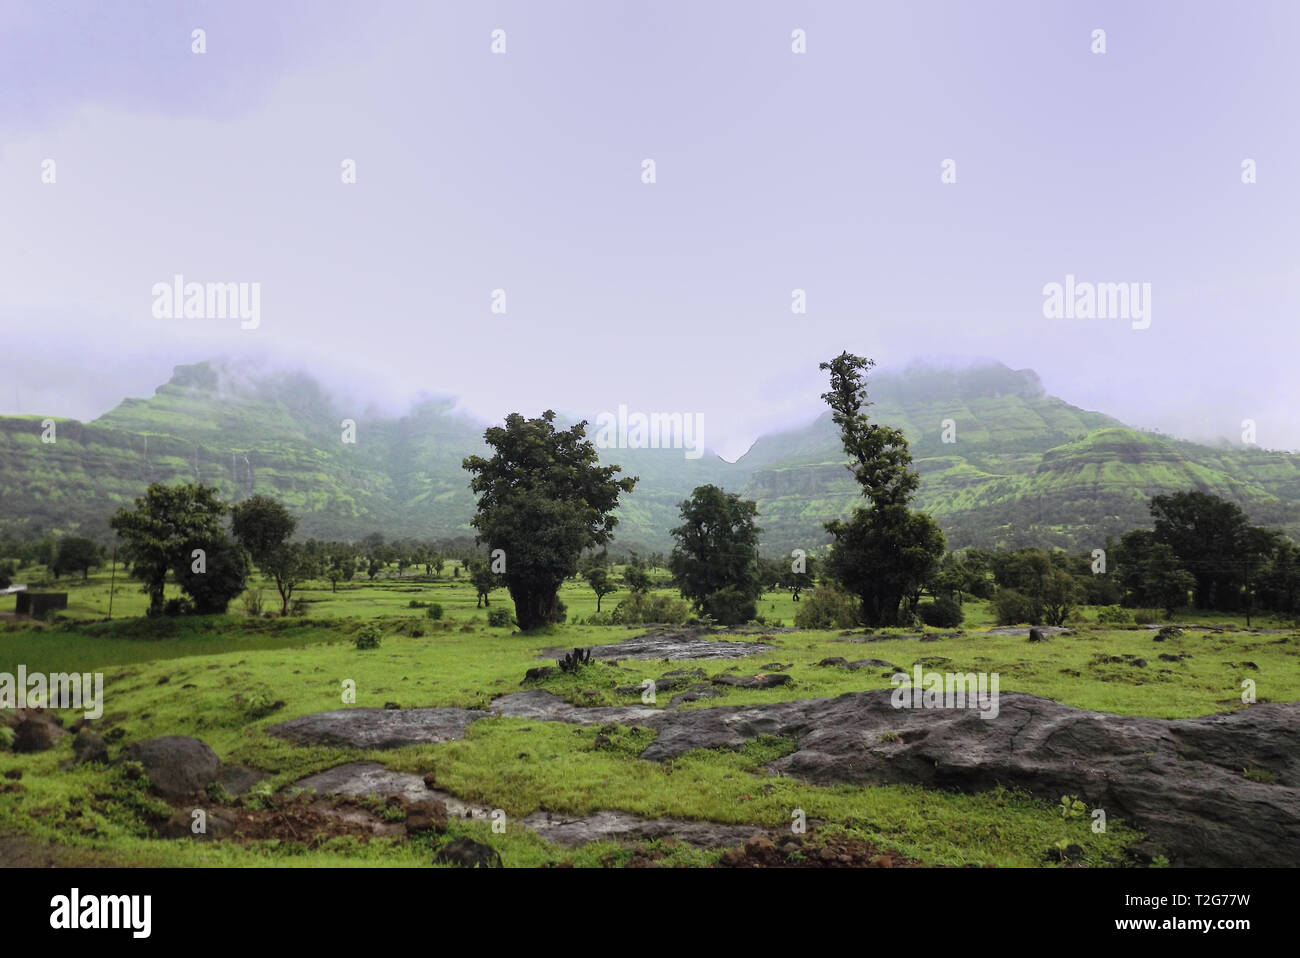 Lush green landscape with monsoon clouds submerging on the mountains at the background Stock Photo